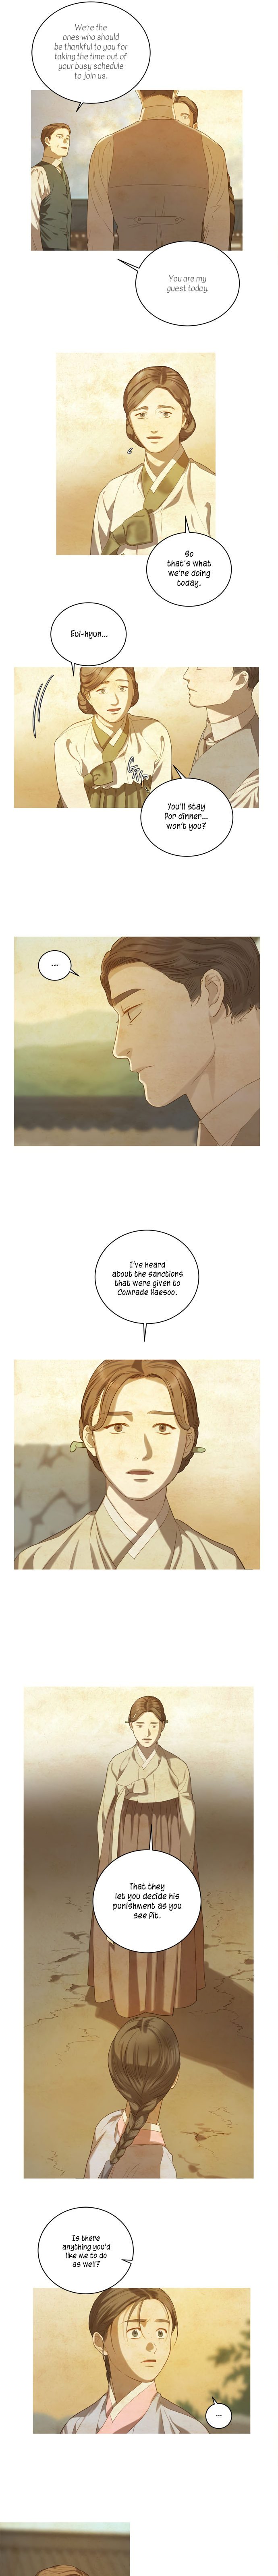 Gorae Byul - The Gyeongseong Mermaid - Chapter 34 Page 4